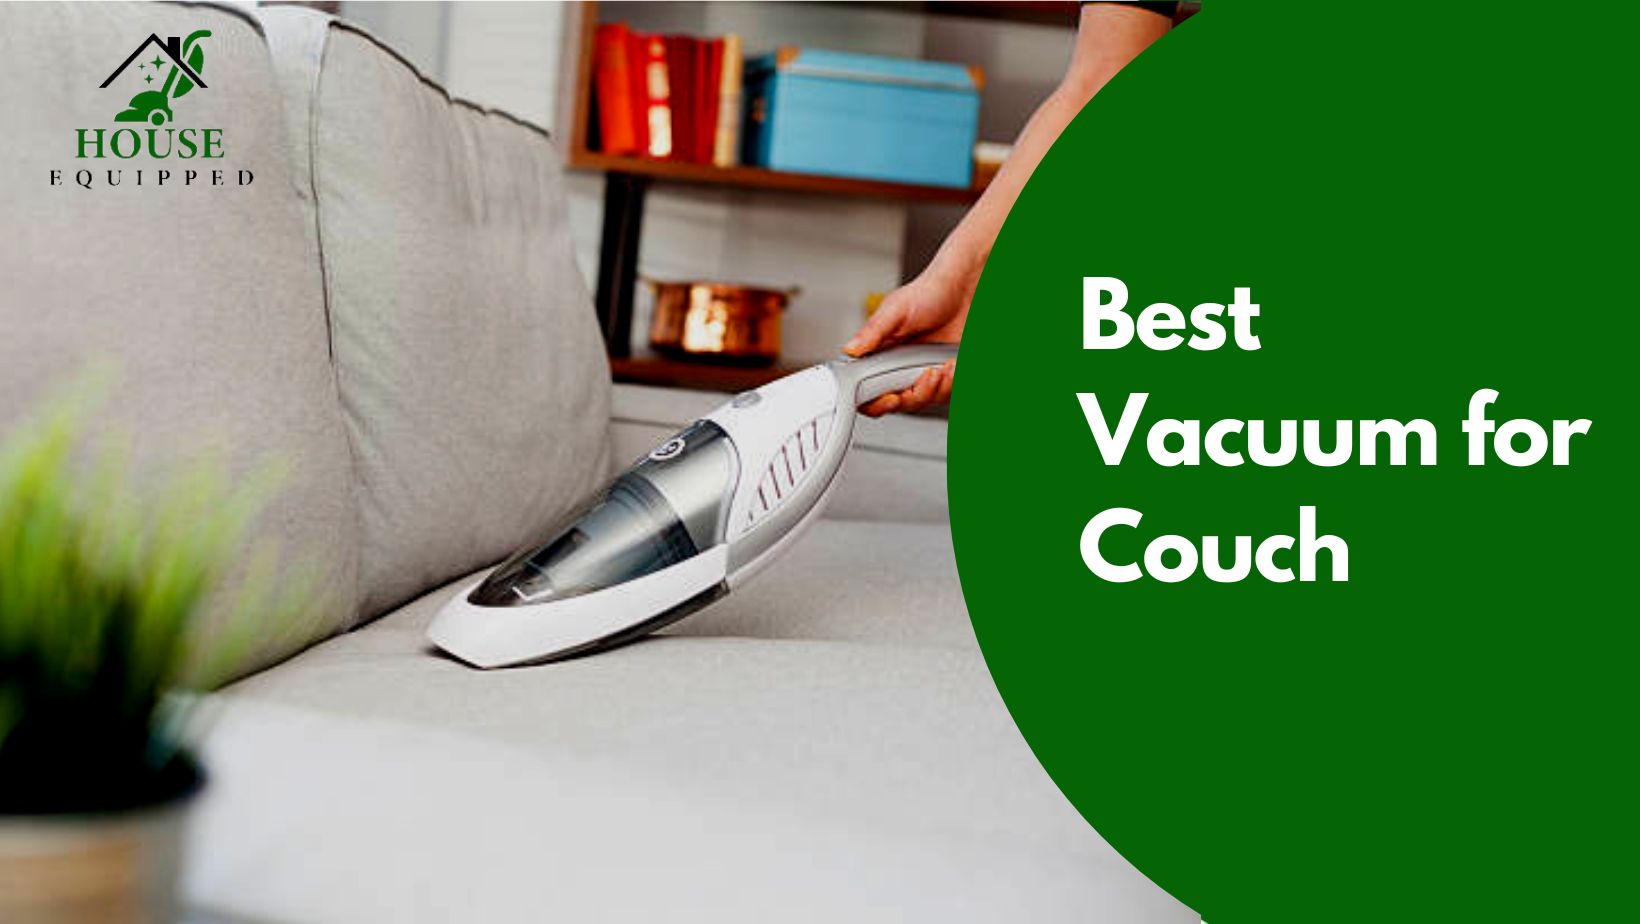 Top 5 Best Vacuums for Couch - Tested by Experts